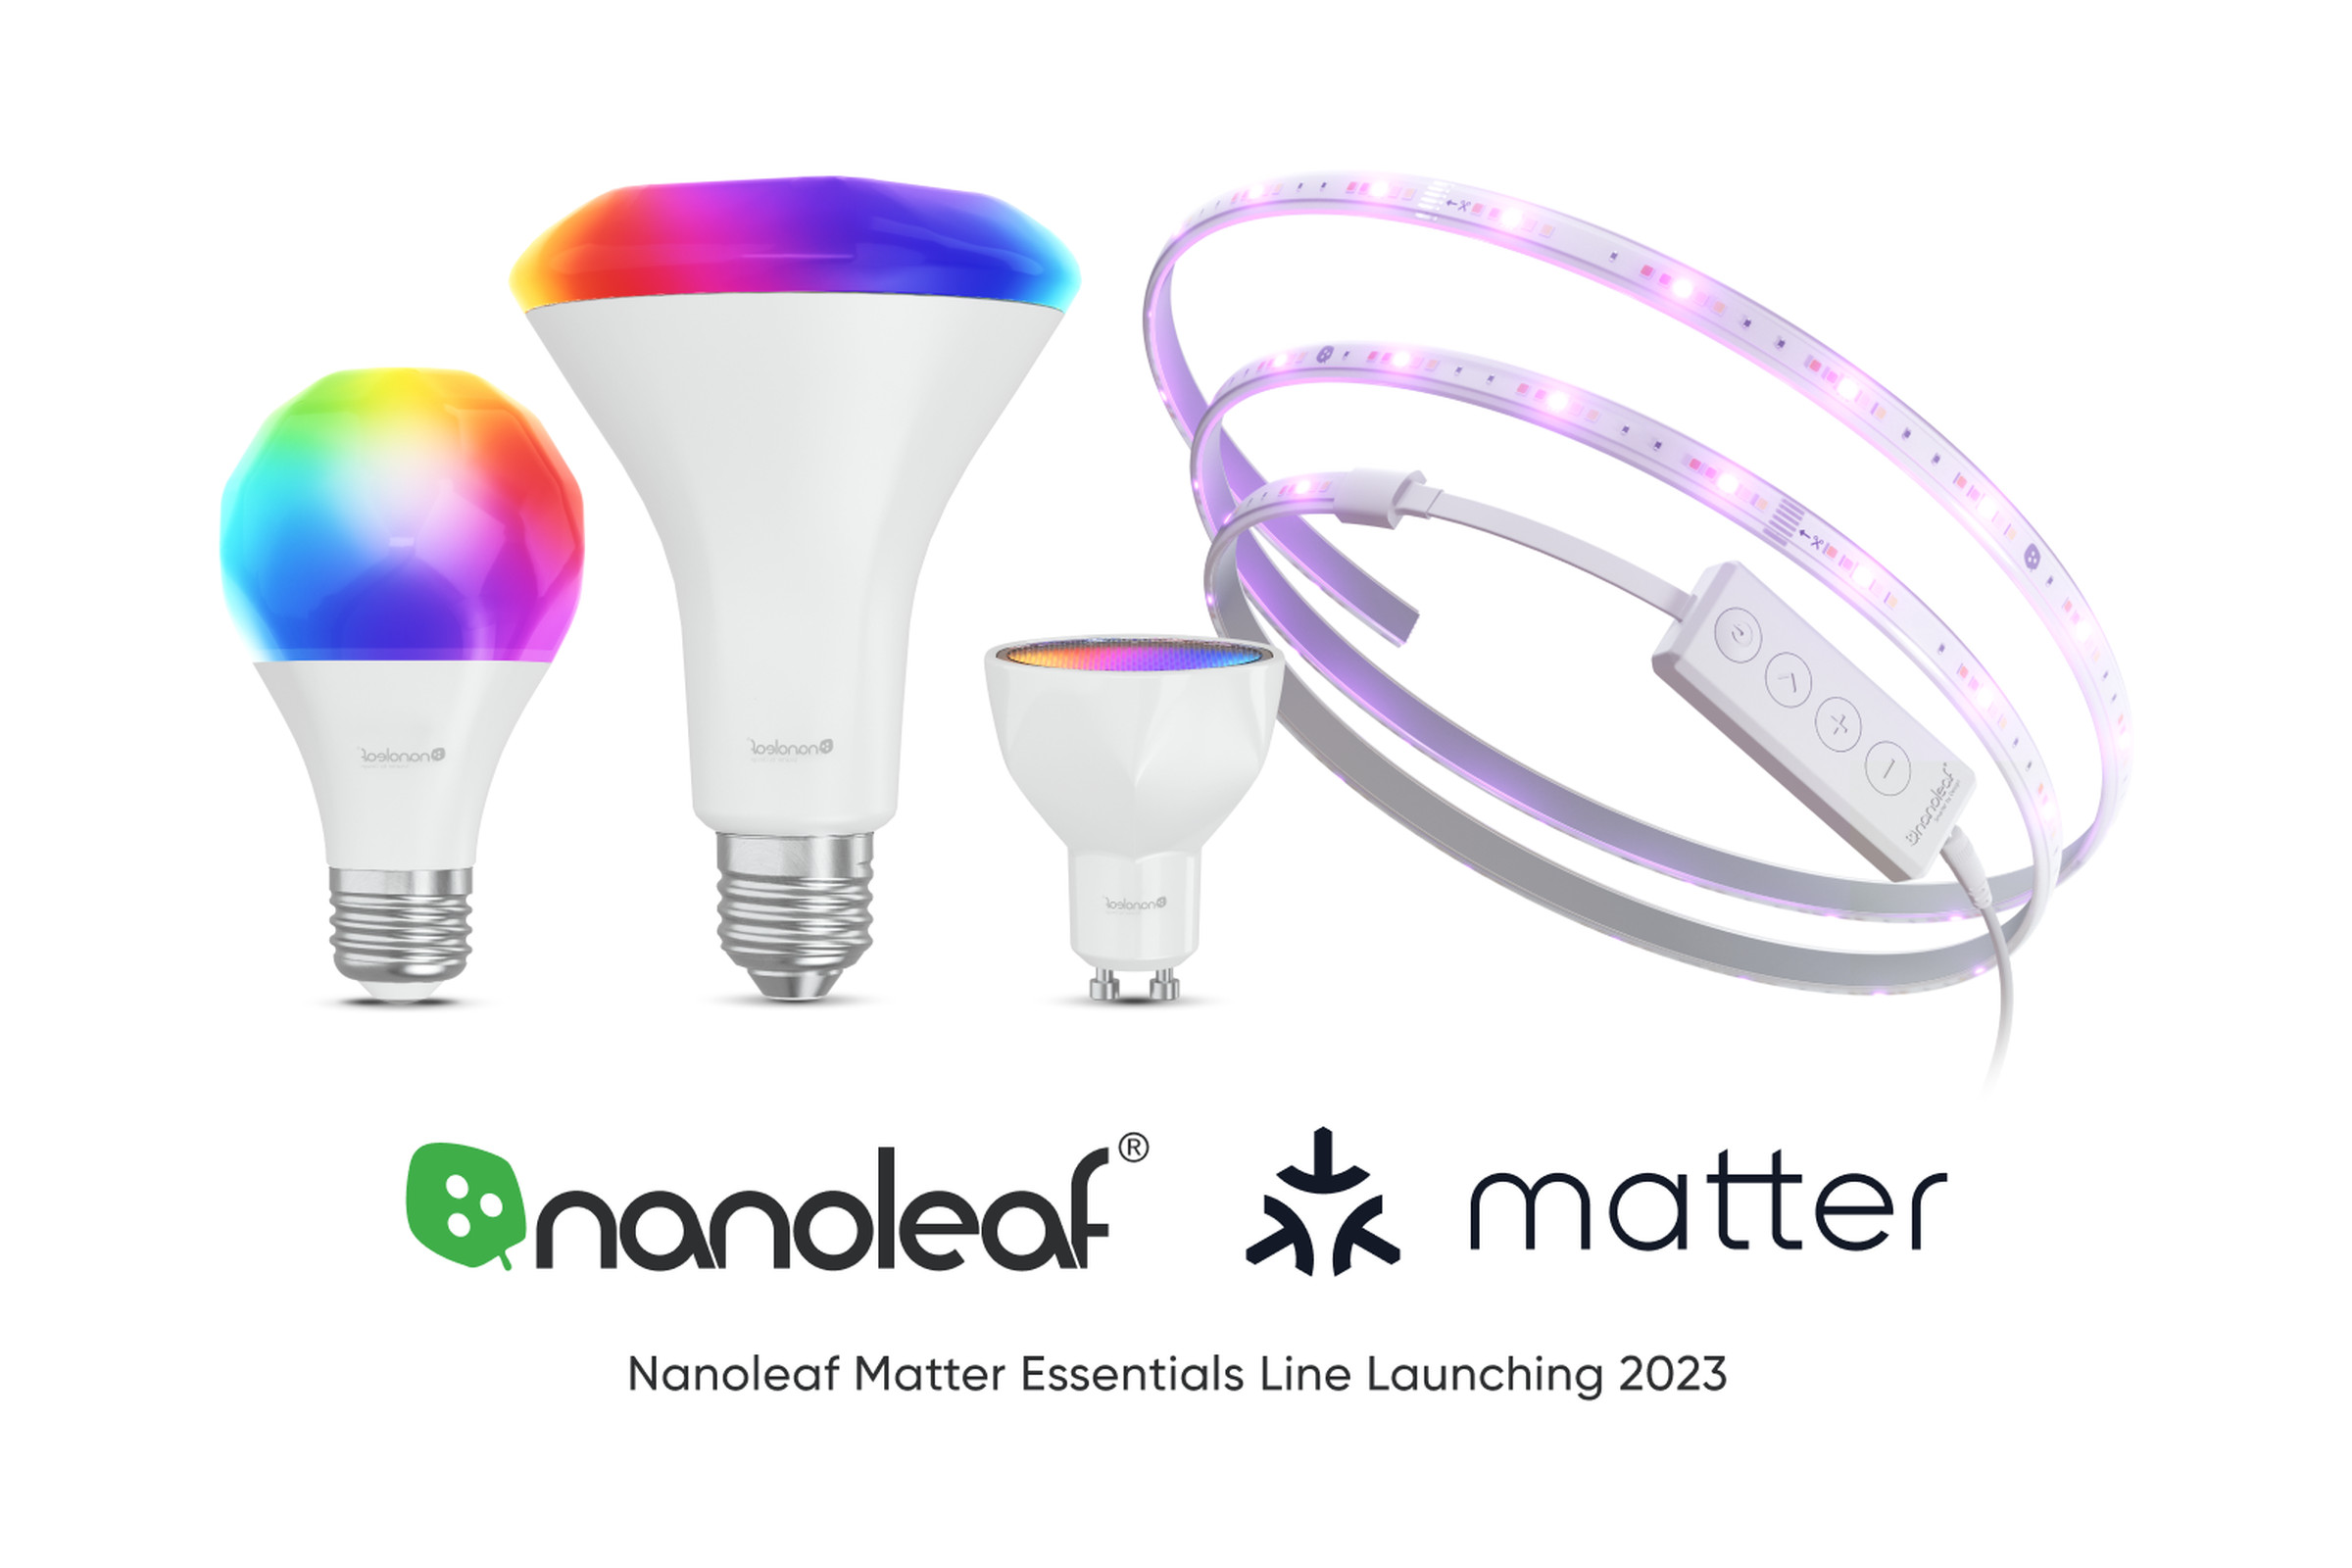 Nanoleaf’s new bulbs will support Thread and Matter.